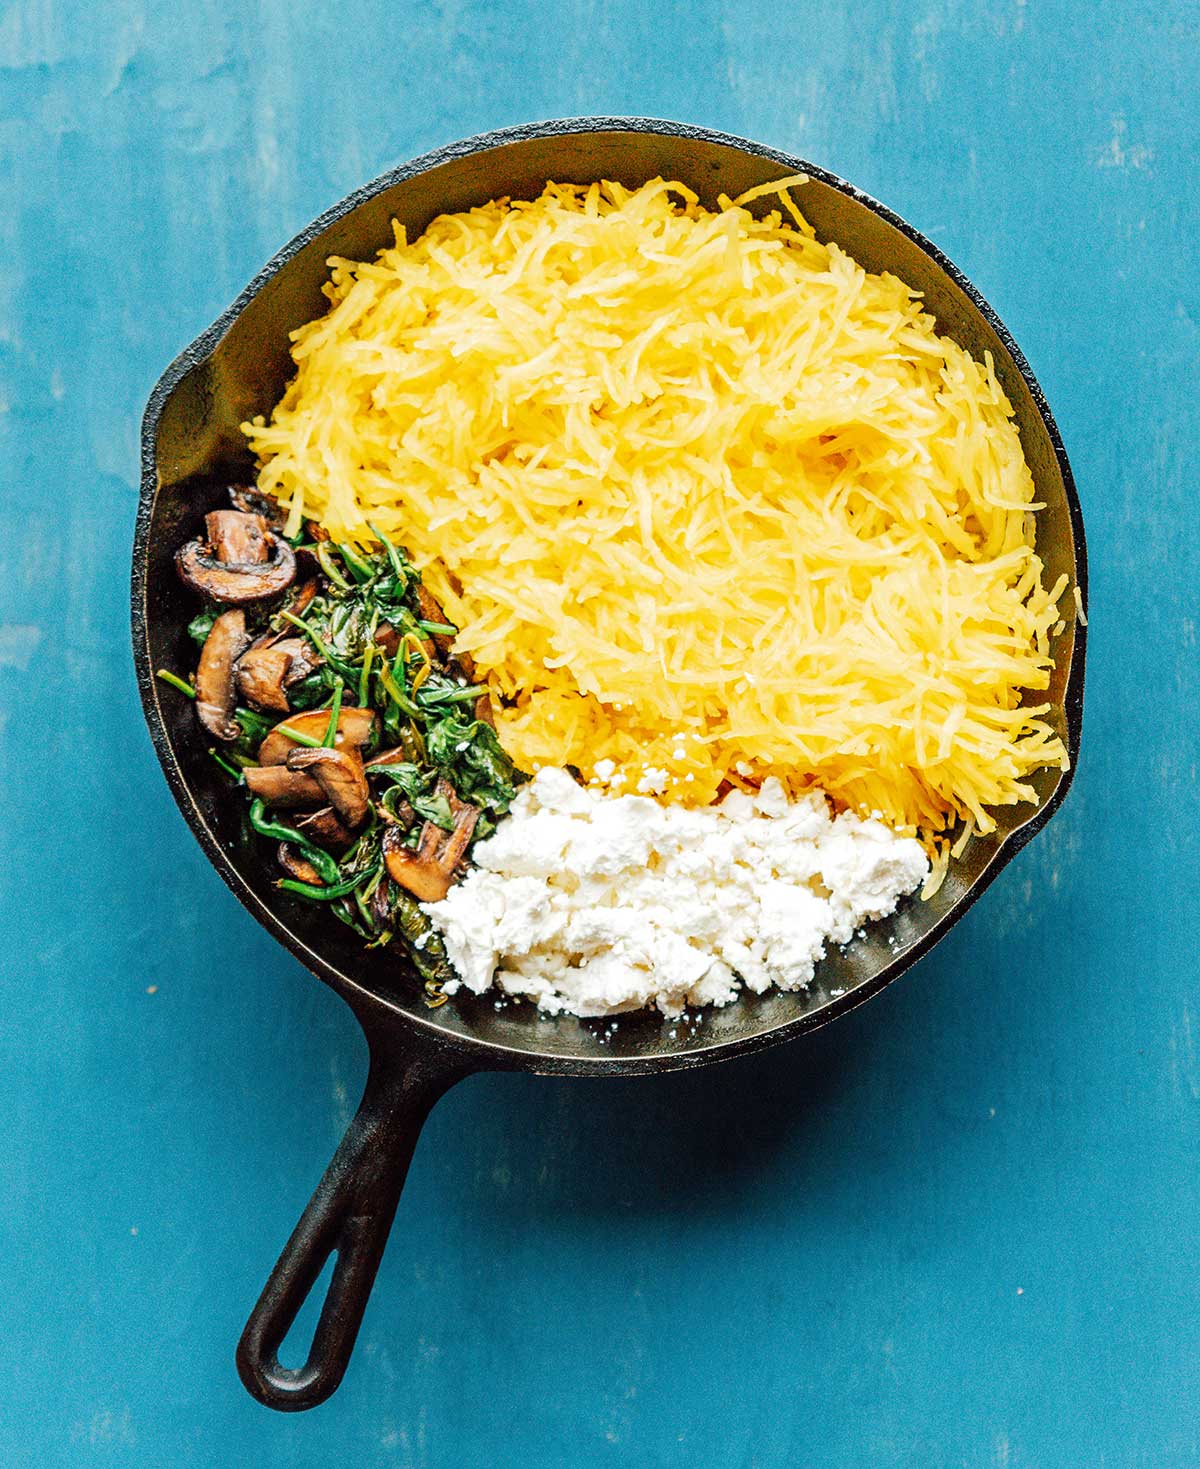 A saute pan filled with spaghetti squash strands, spinach, mushrooms, and goat cheese